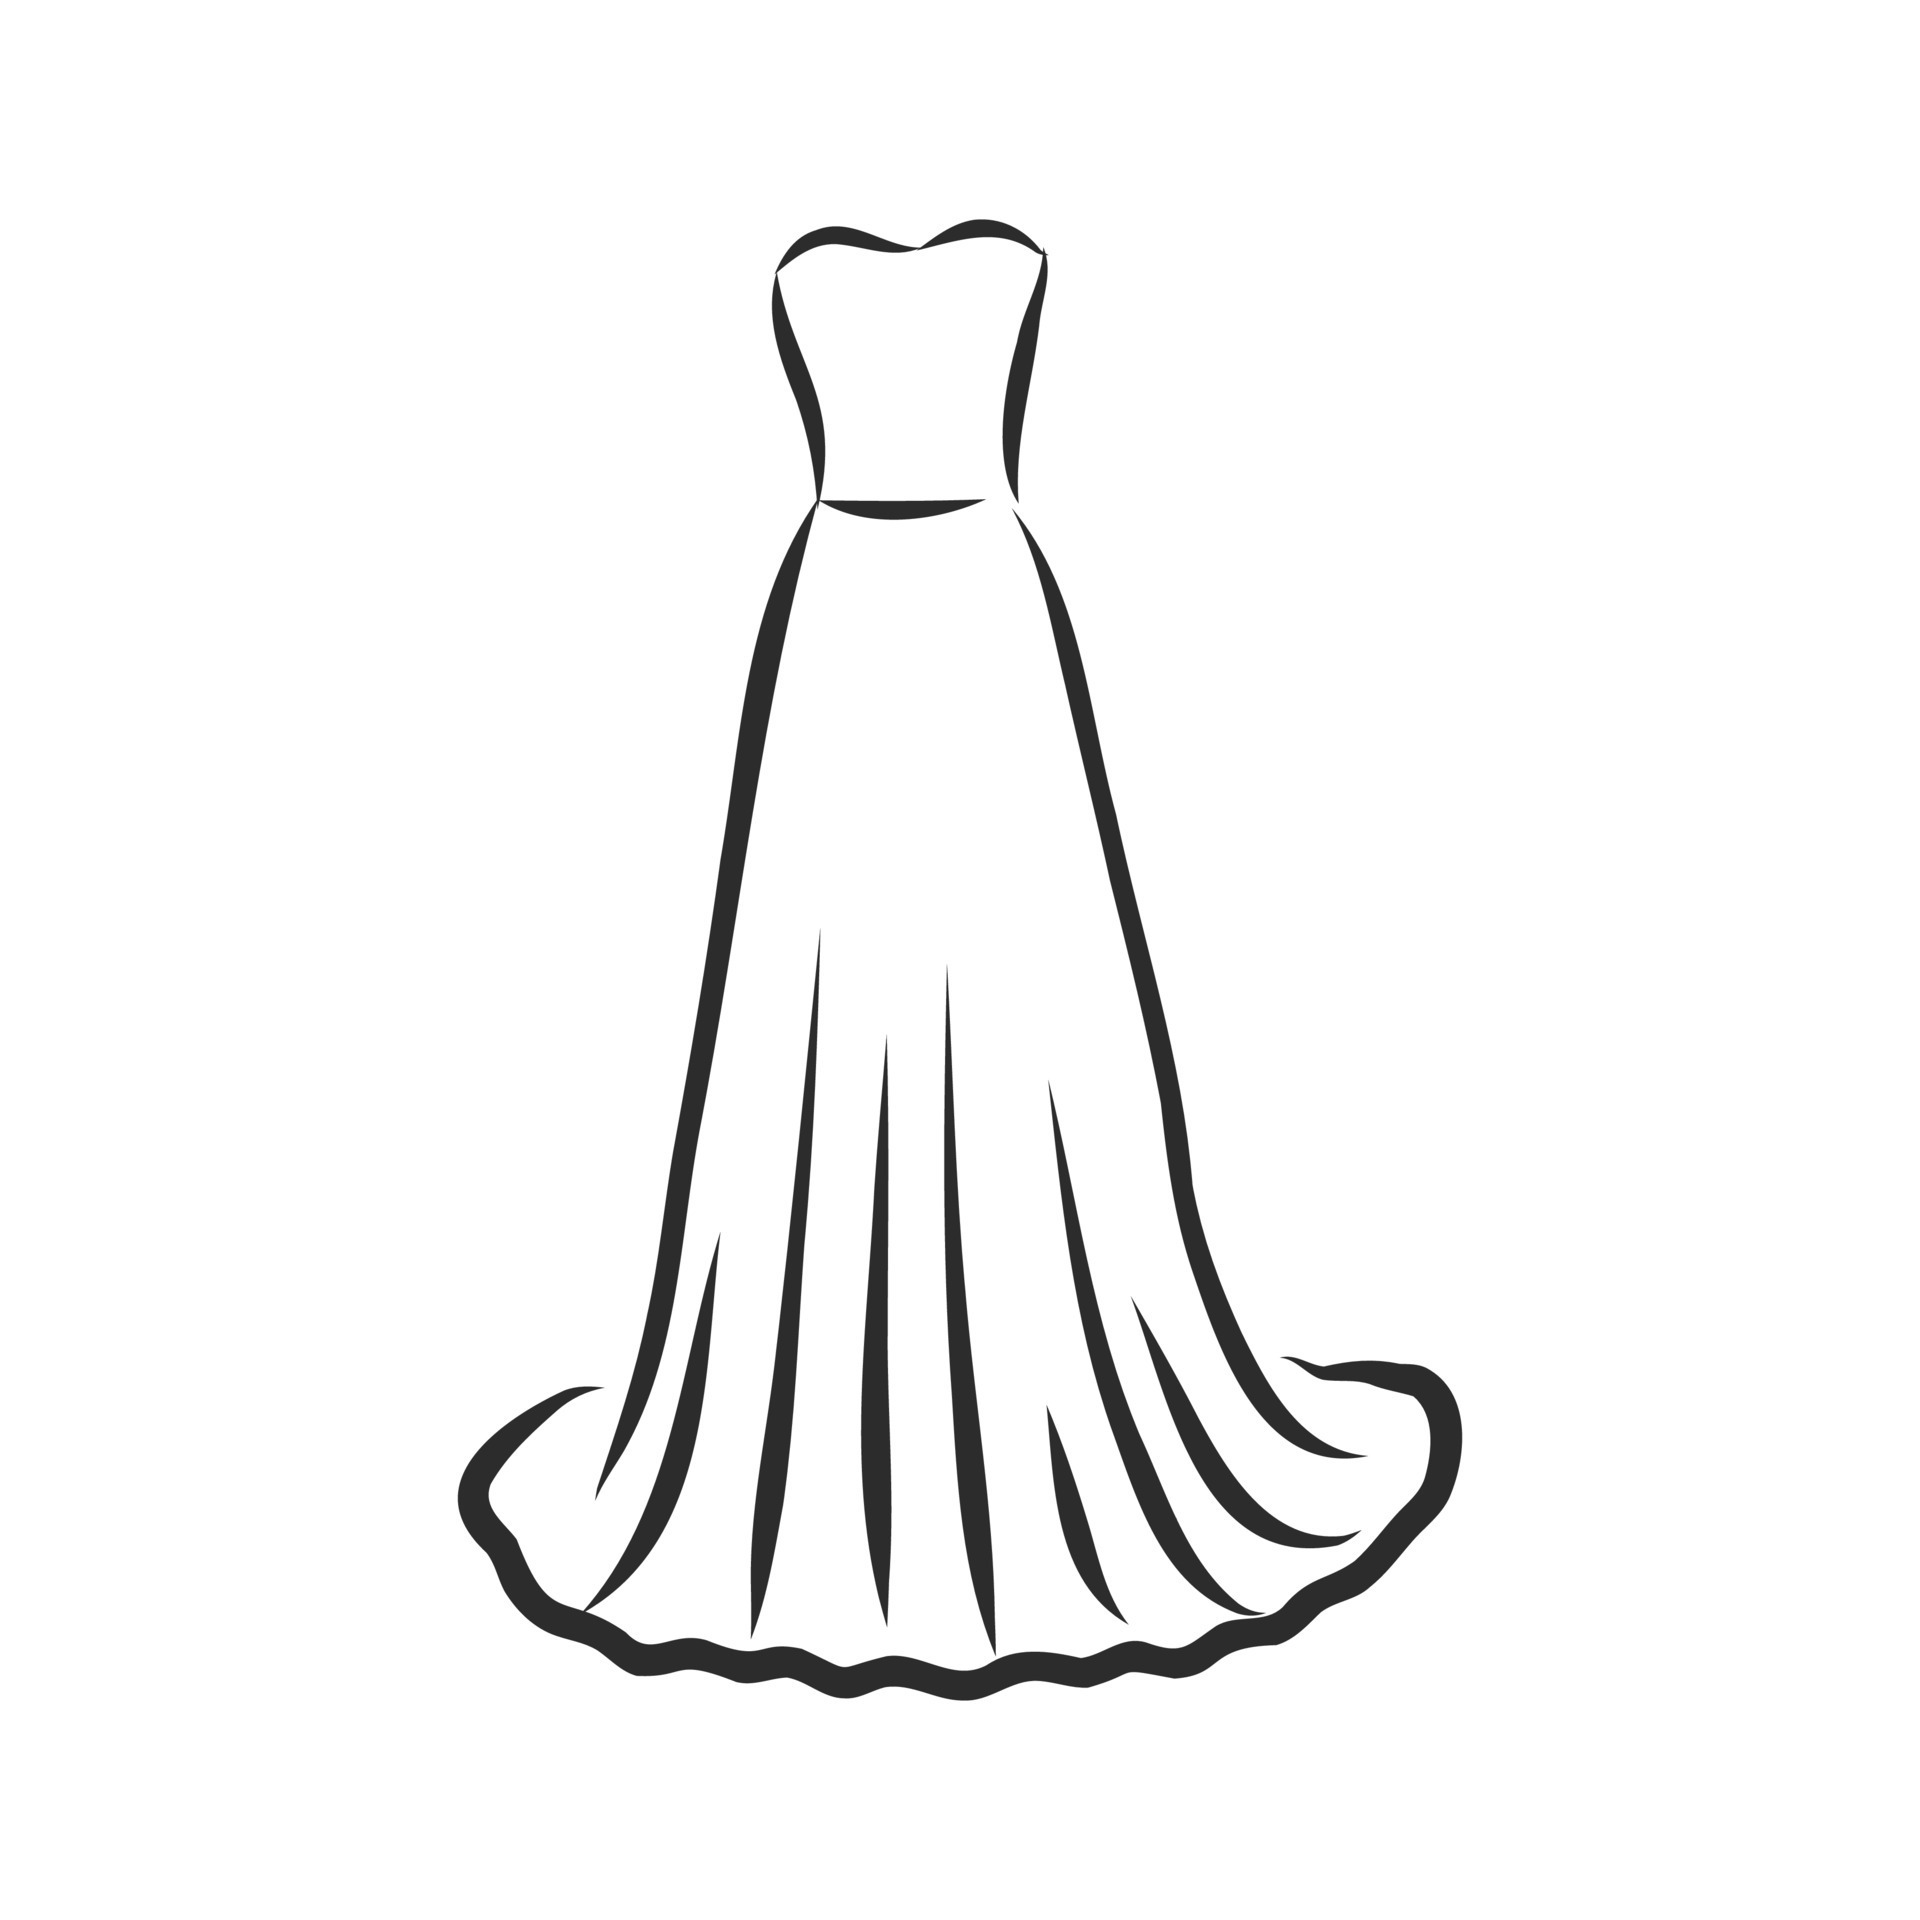 An Image Of A Girl In A Dress Coloring Pages Outline Sketch Drawing Vector Easy  Dress Drawing Easy Dress Outline Easy Dress Sketch PNG and Vector with  Transparent Background for Free Download